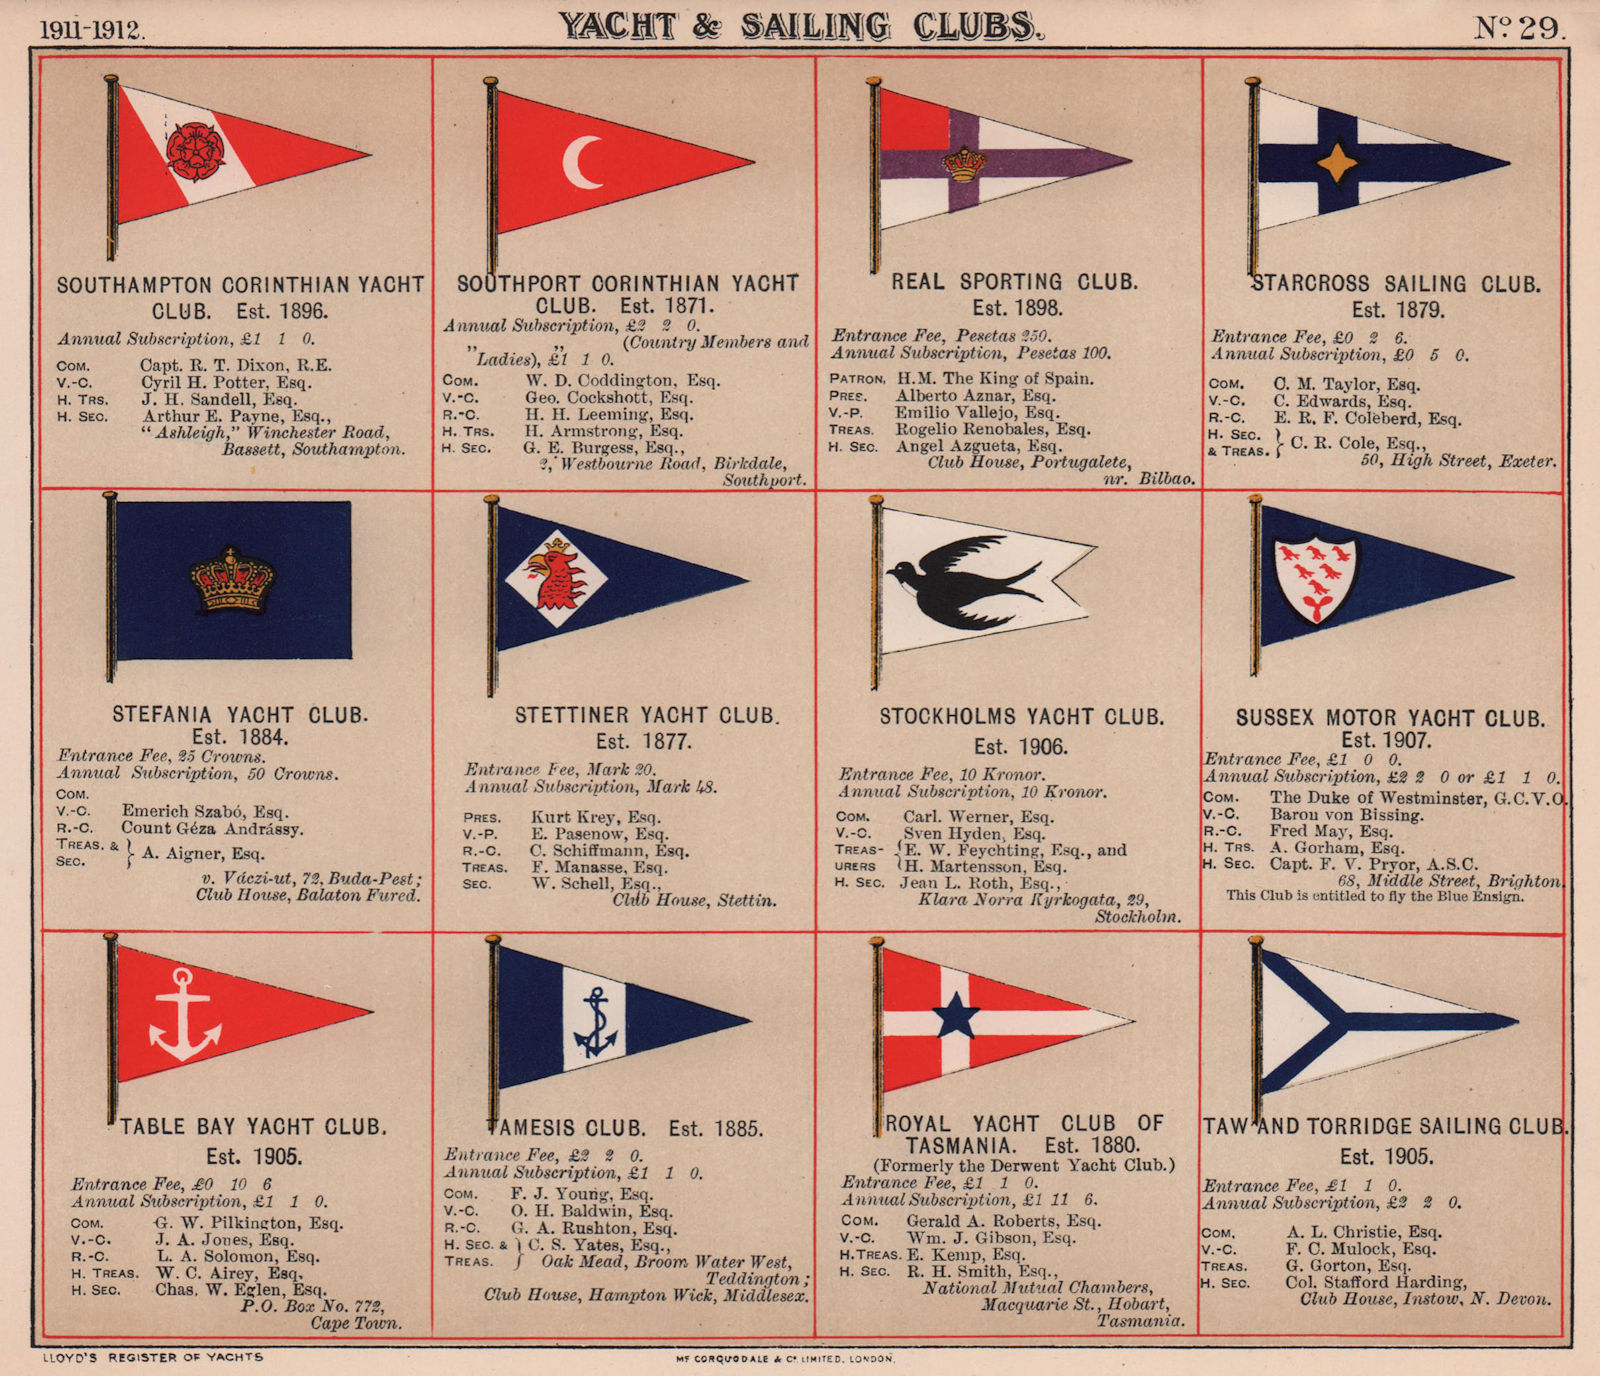 YACHT & SAILING CLUB FLAGS S-T Southport Sussex Table Bay Tamesis Tasmania 1911